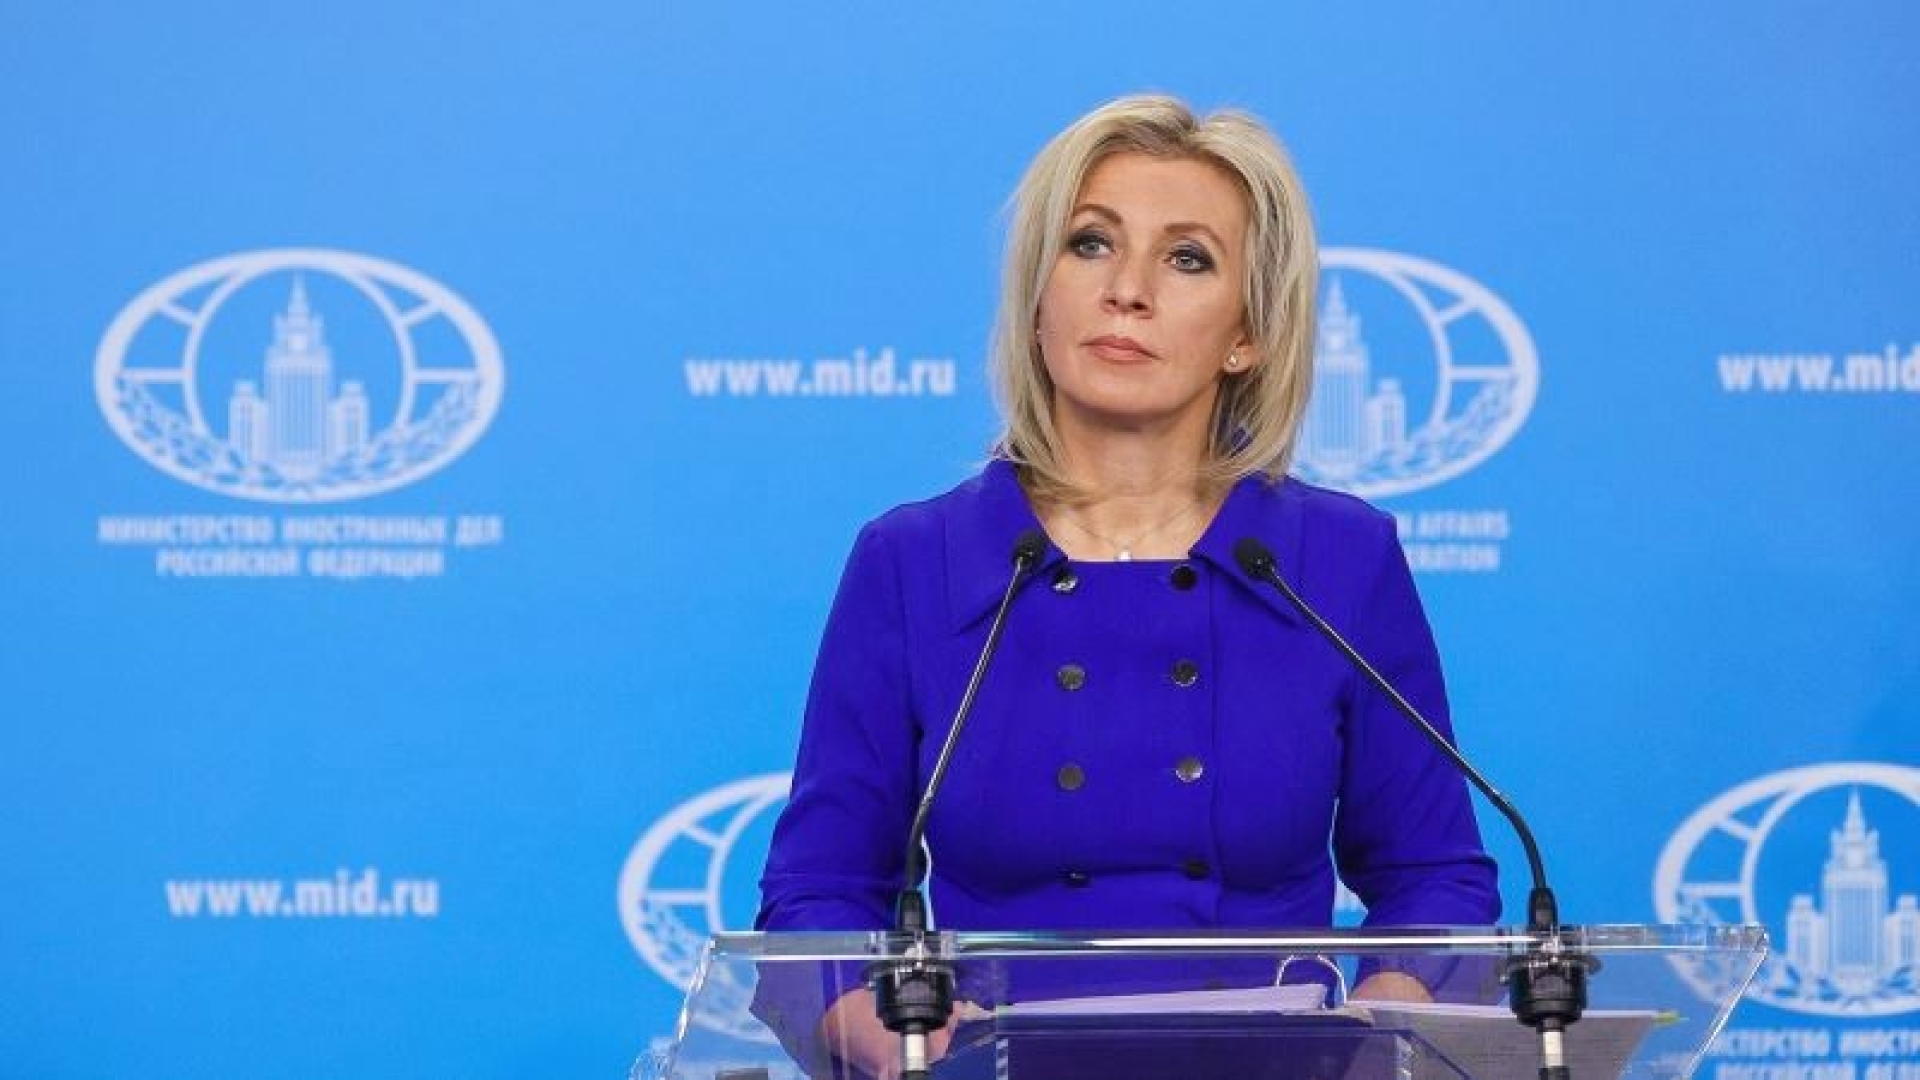 Provocations without "value added" and the death of the autonomous UN organism - Maria Zakharova about US biological laboratories in Ukraine